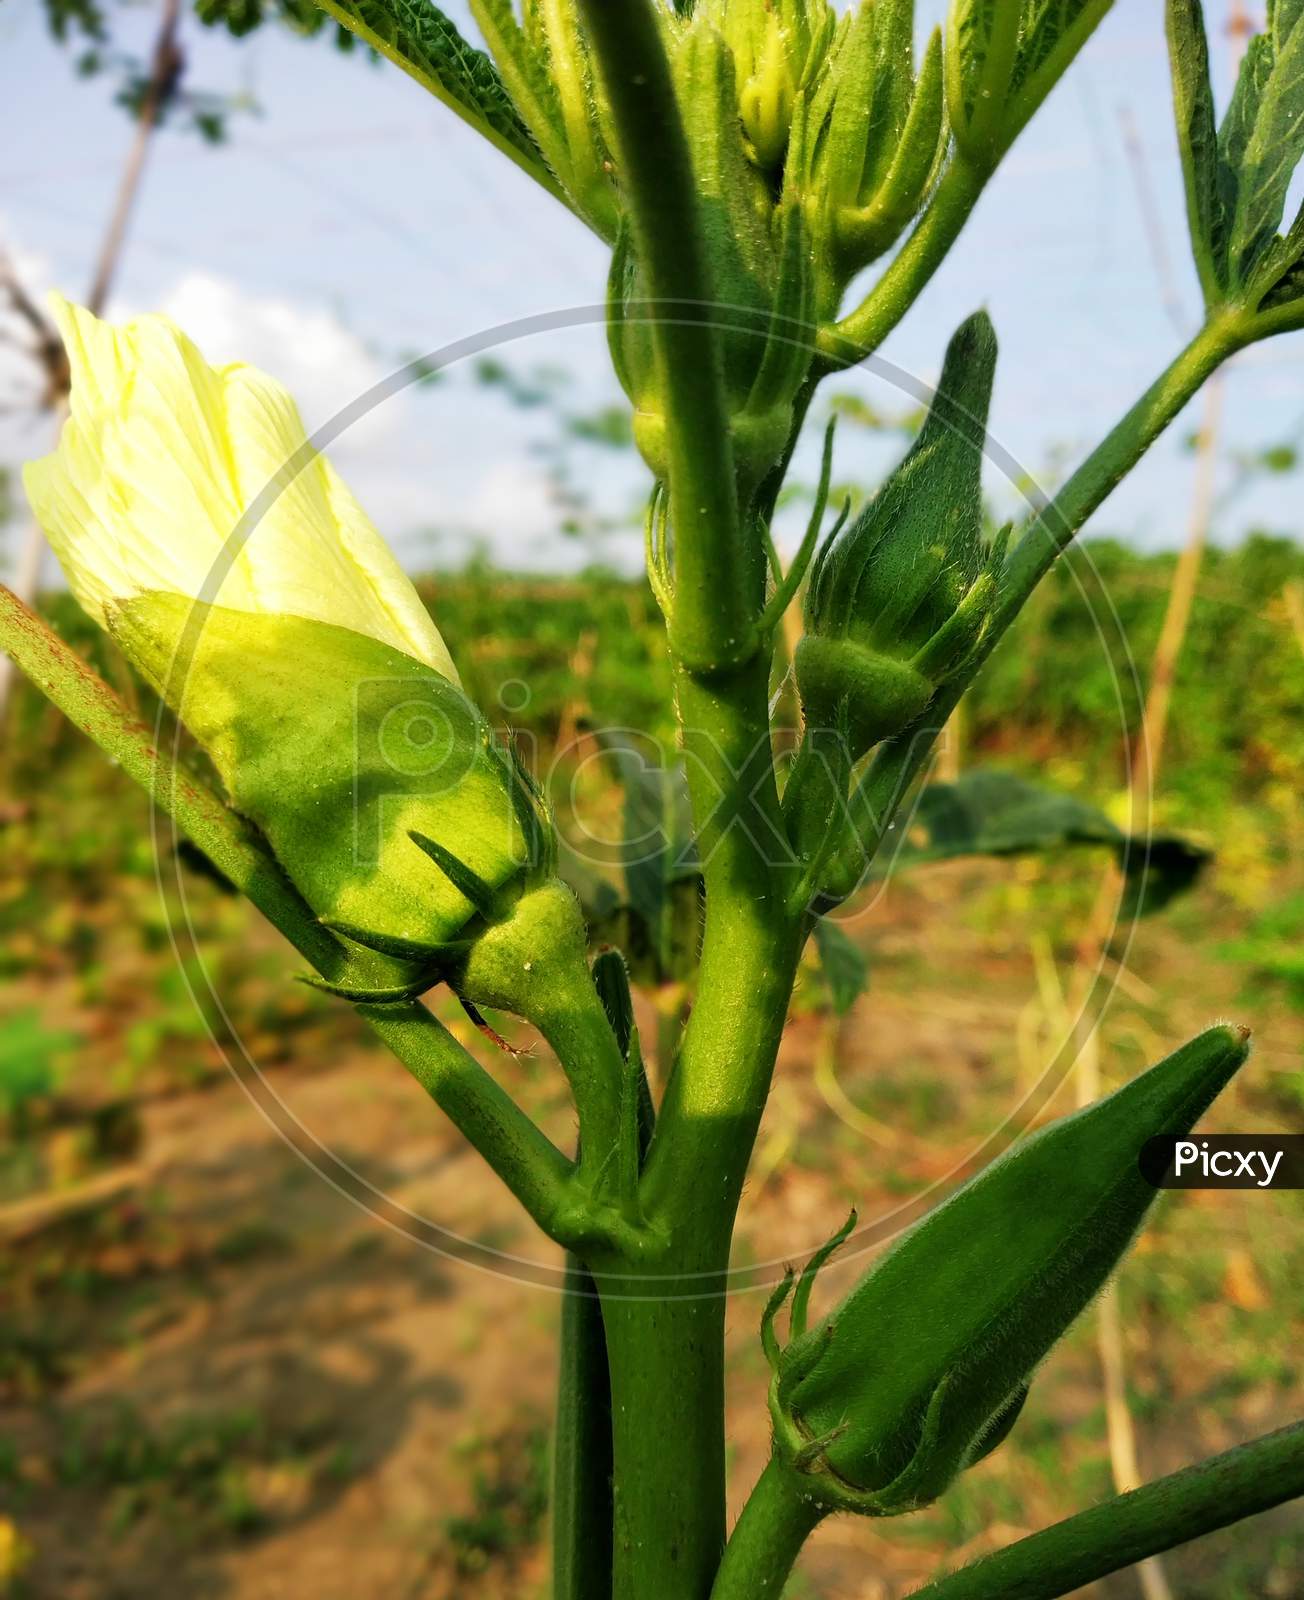 This is lady's finger.  And Okra!  The color of the flower is yellow.  The lady's finger is green.  Its background has a view of the farm.